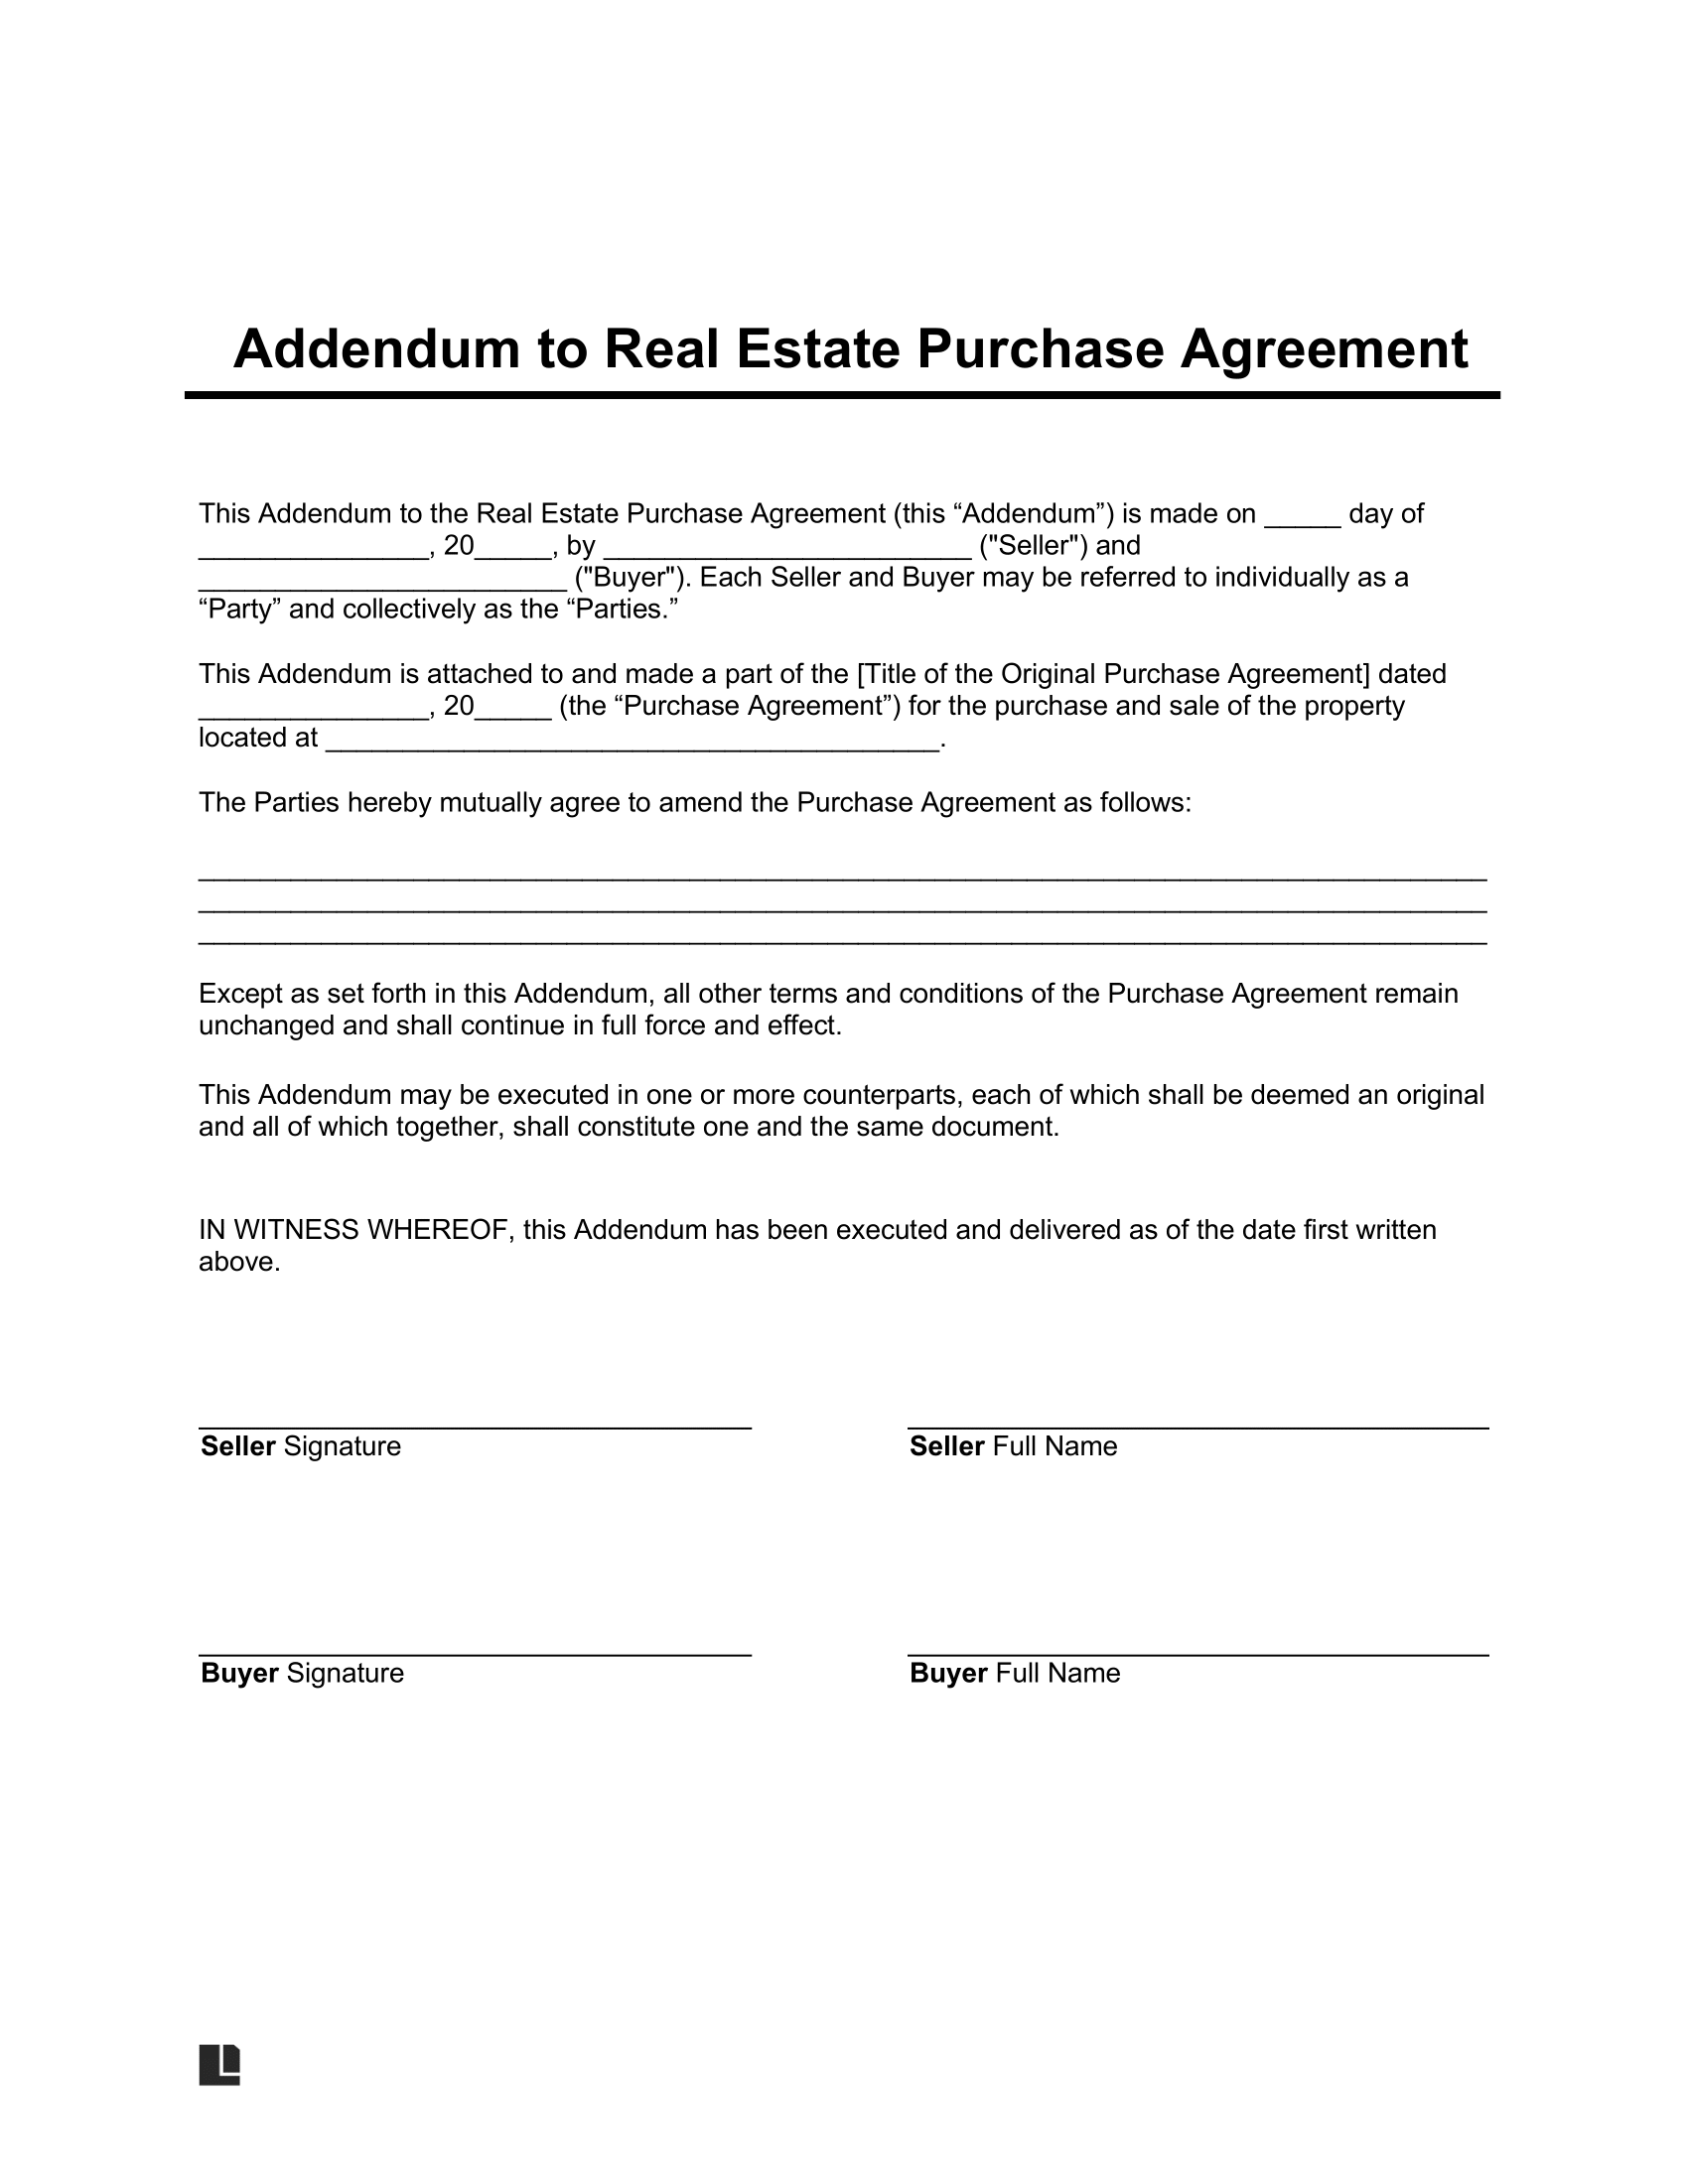 addendum to real estate purchase agreement